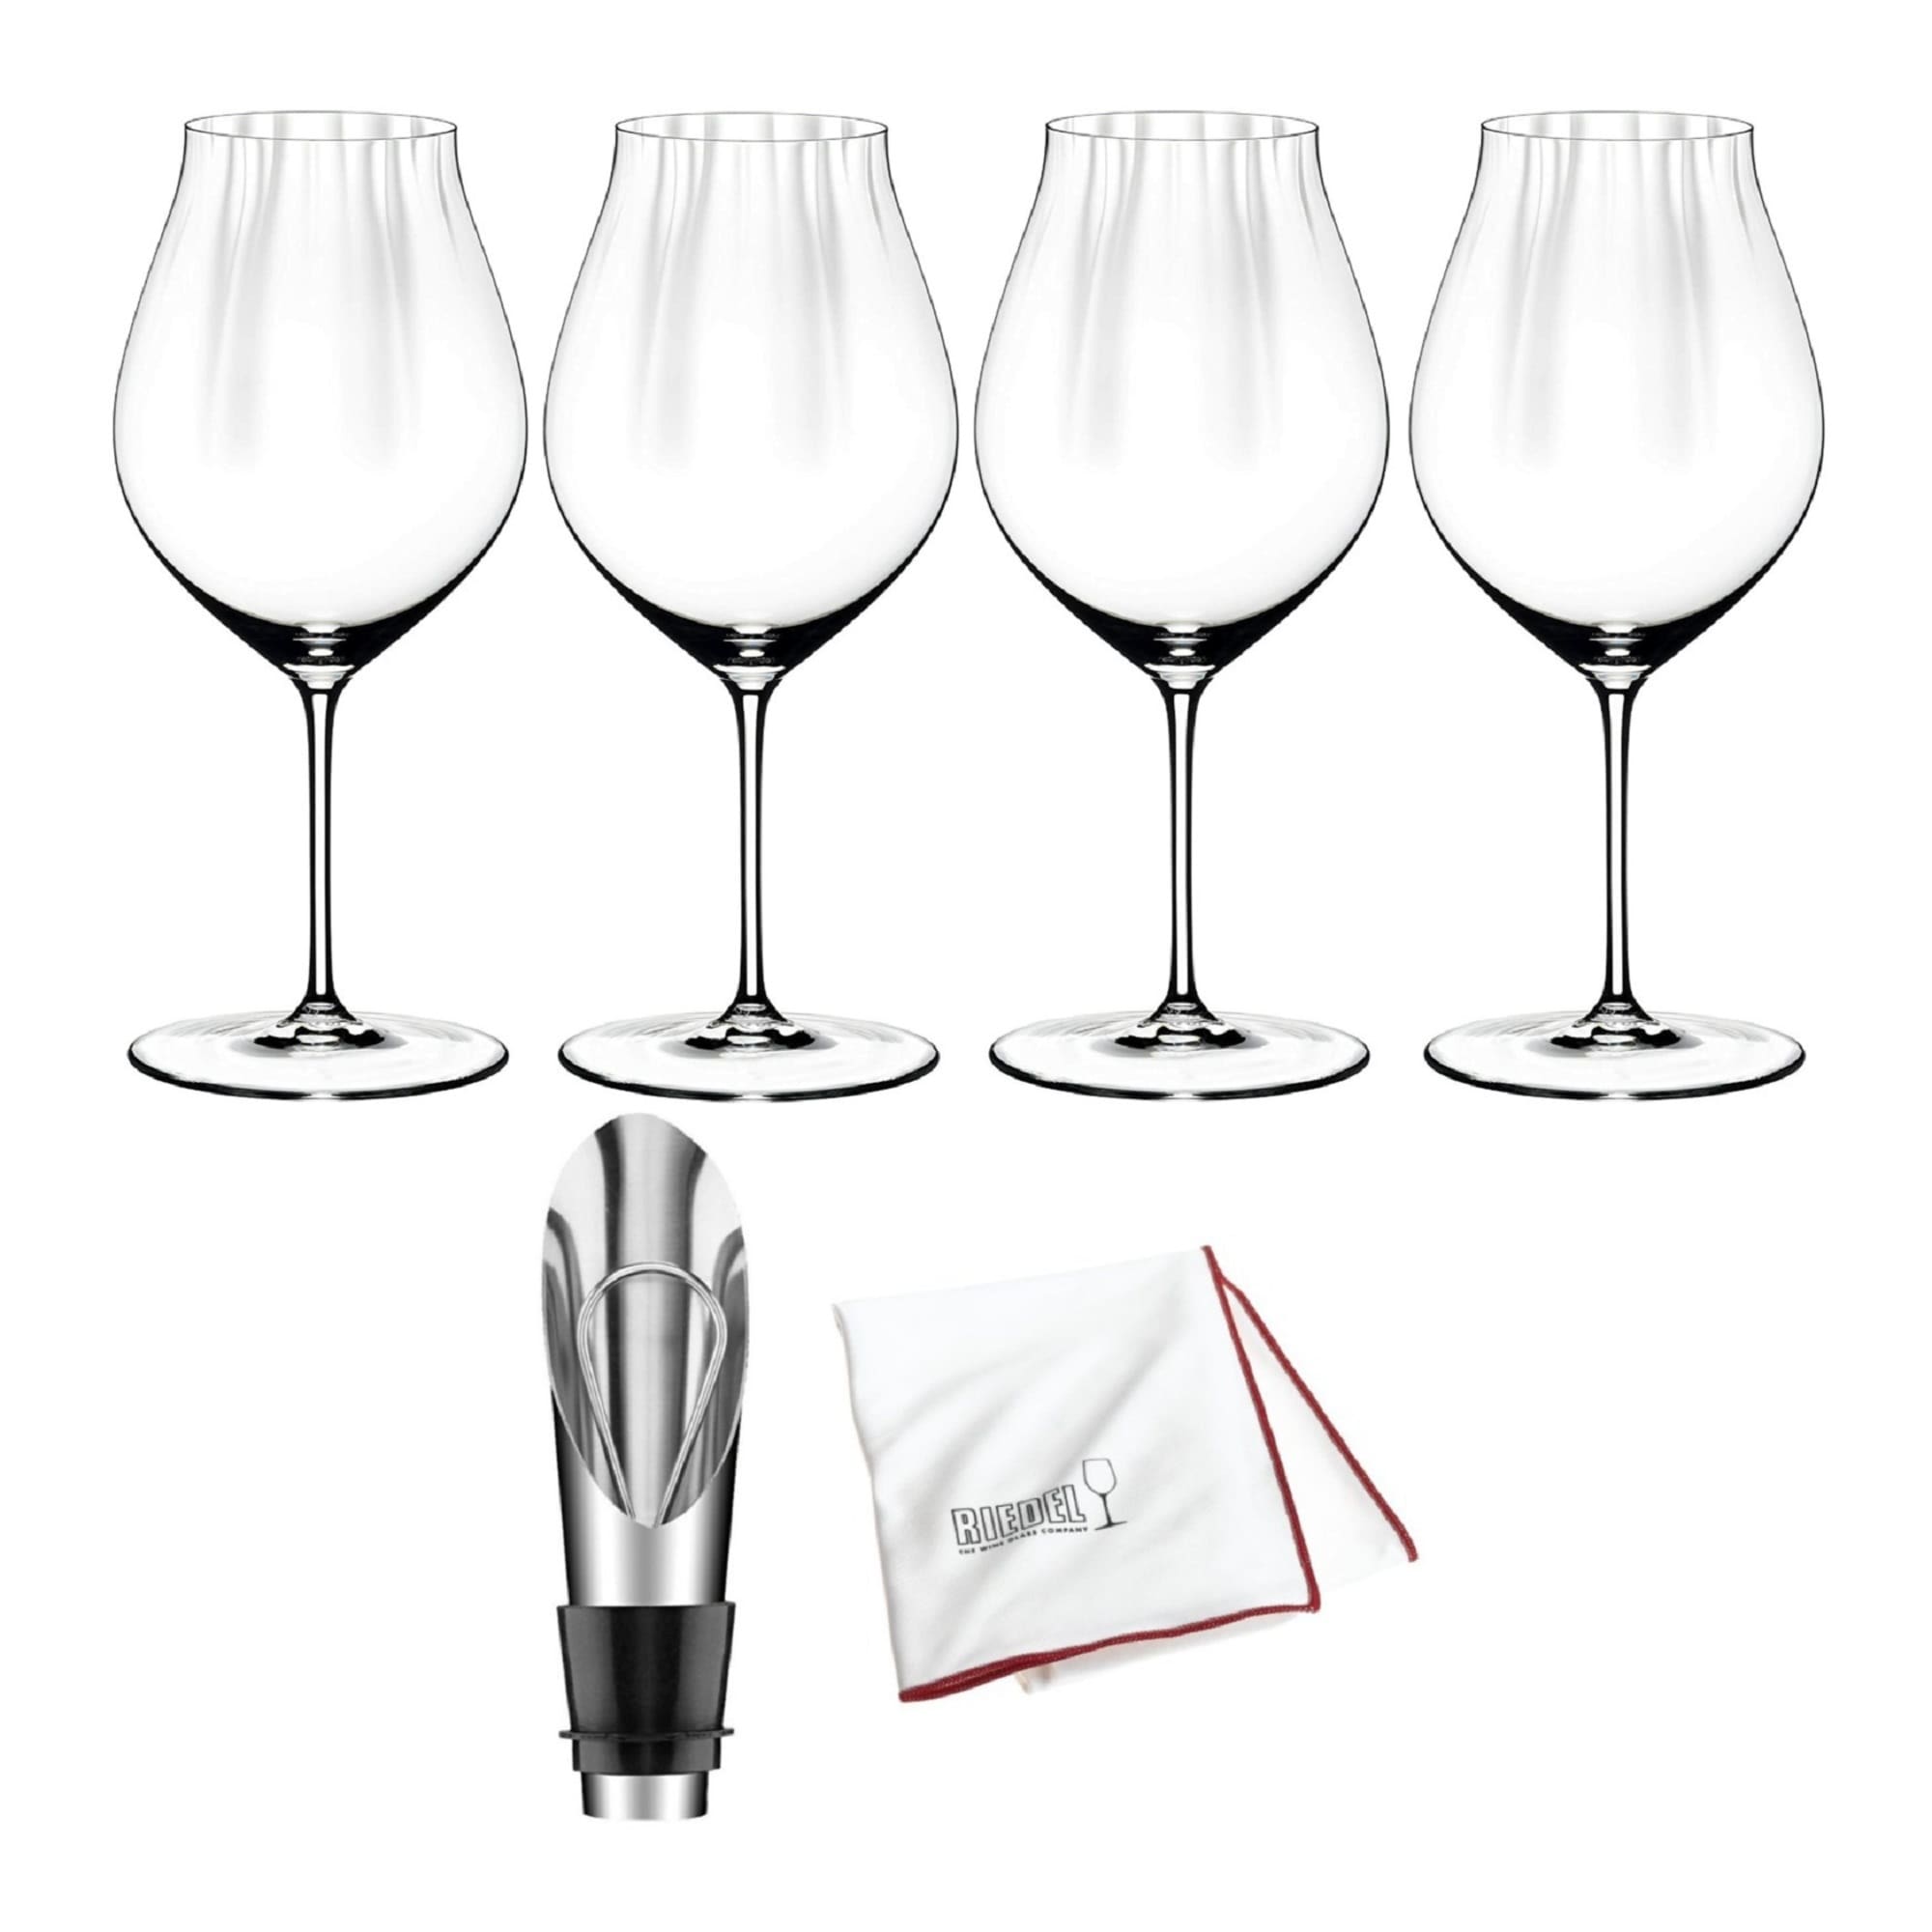 https://ak1.ostkcdn.com/images/products/is/images/direct/0cec92e6ccf24a914e7012075f0acc4d8b0fe744/Riedel-Performance-Pinot-Noir-Wine-Glass-%284-Pack%29-with-Cloth-Bundle.jpg